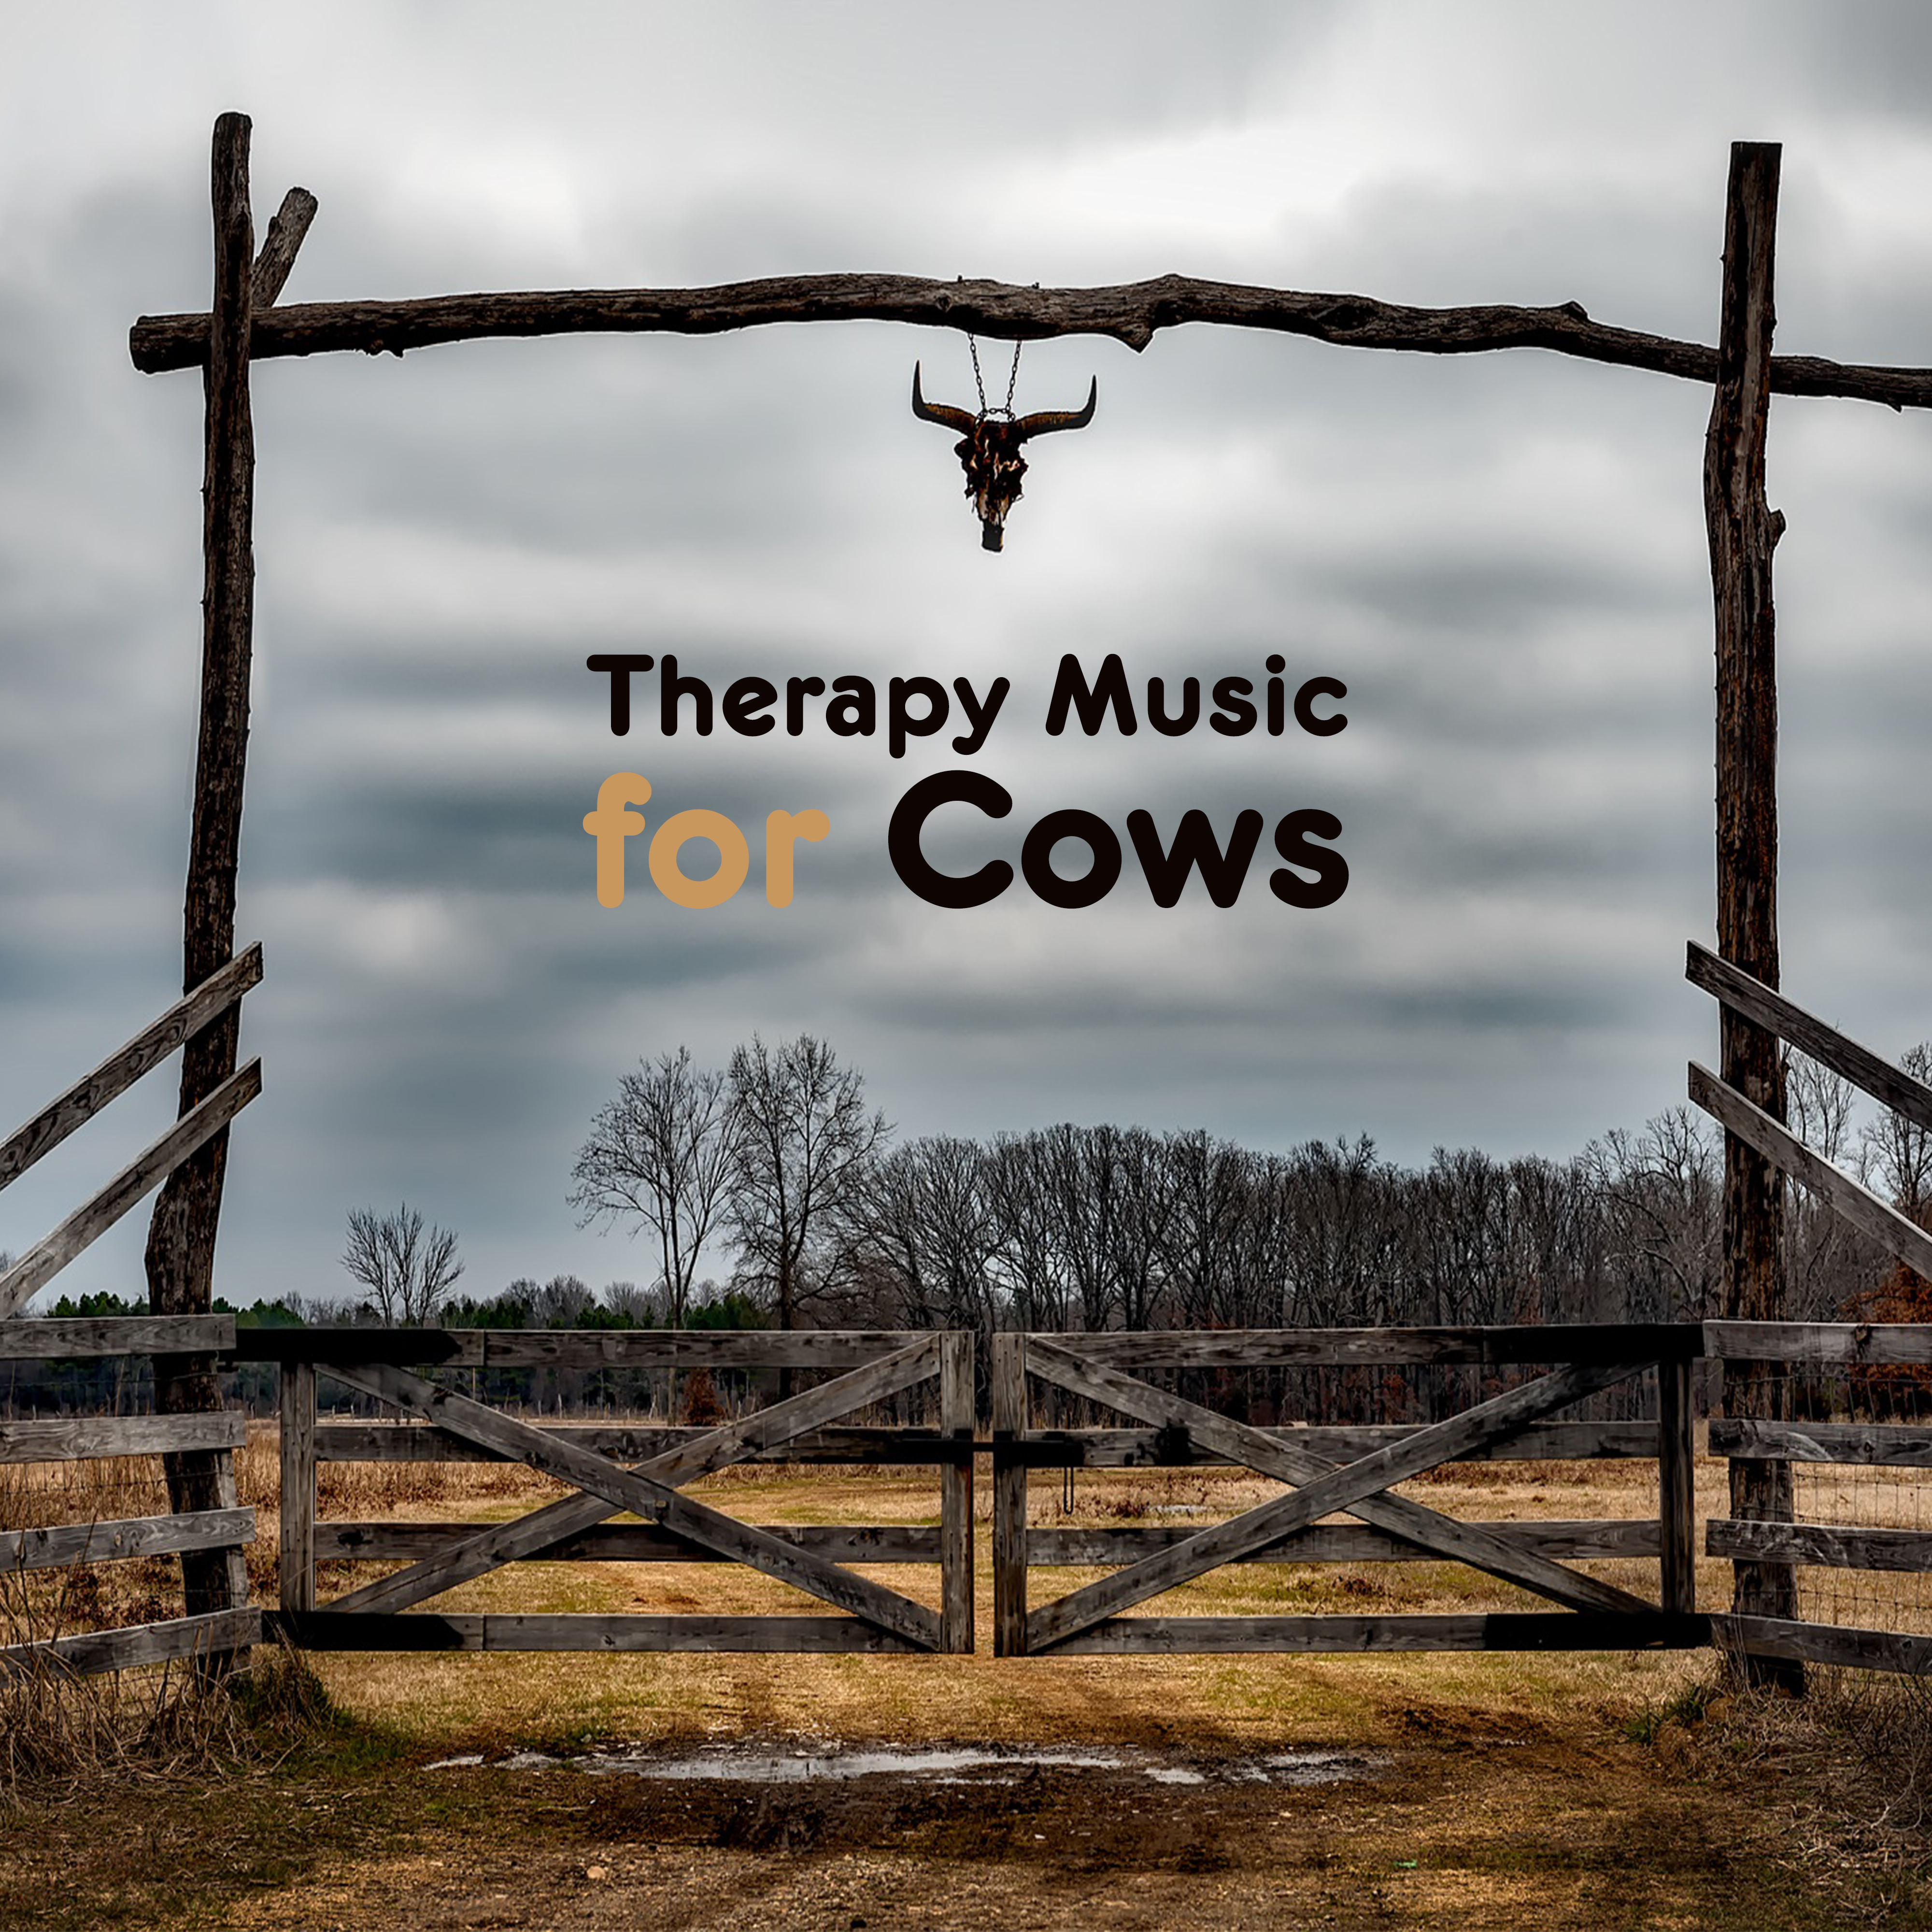 Therapy Music for Cows – Electronic Music Therapy, New Age 2017, Relaxed Cows, Meditation